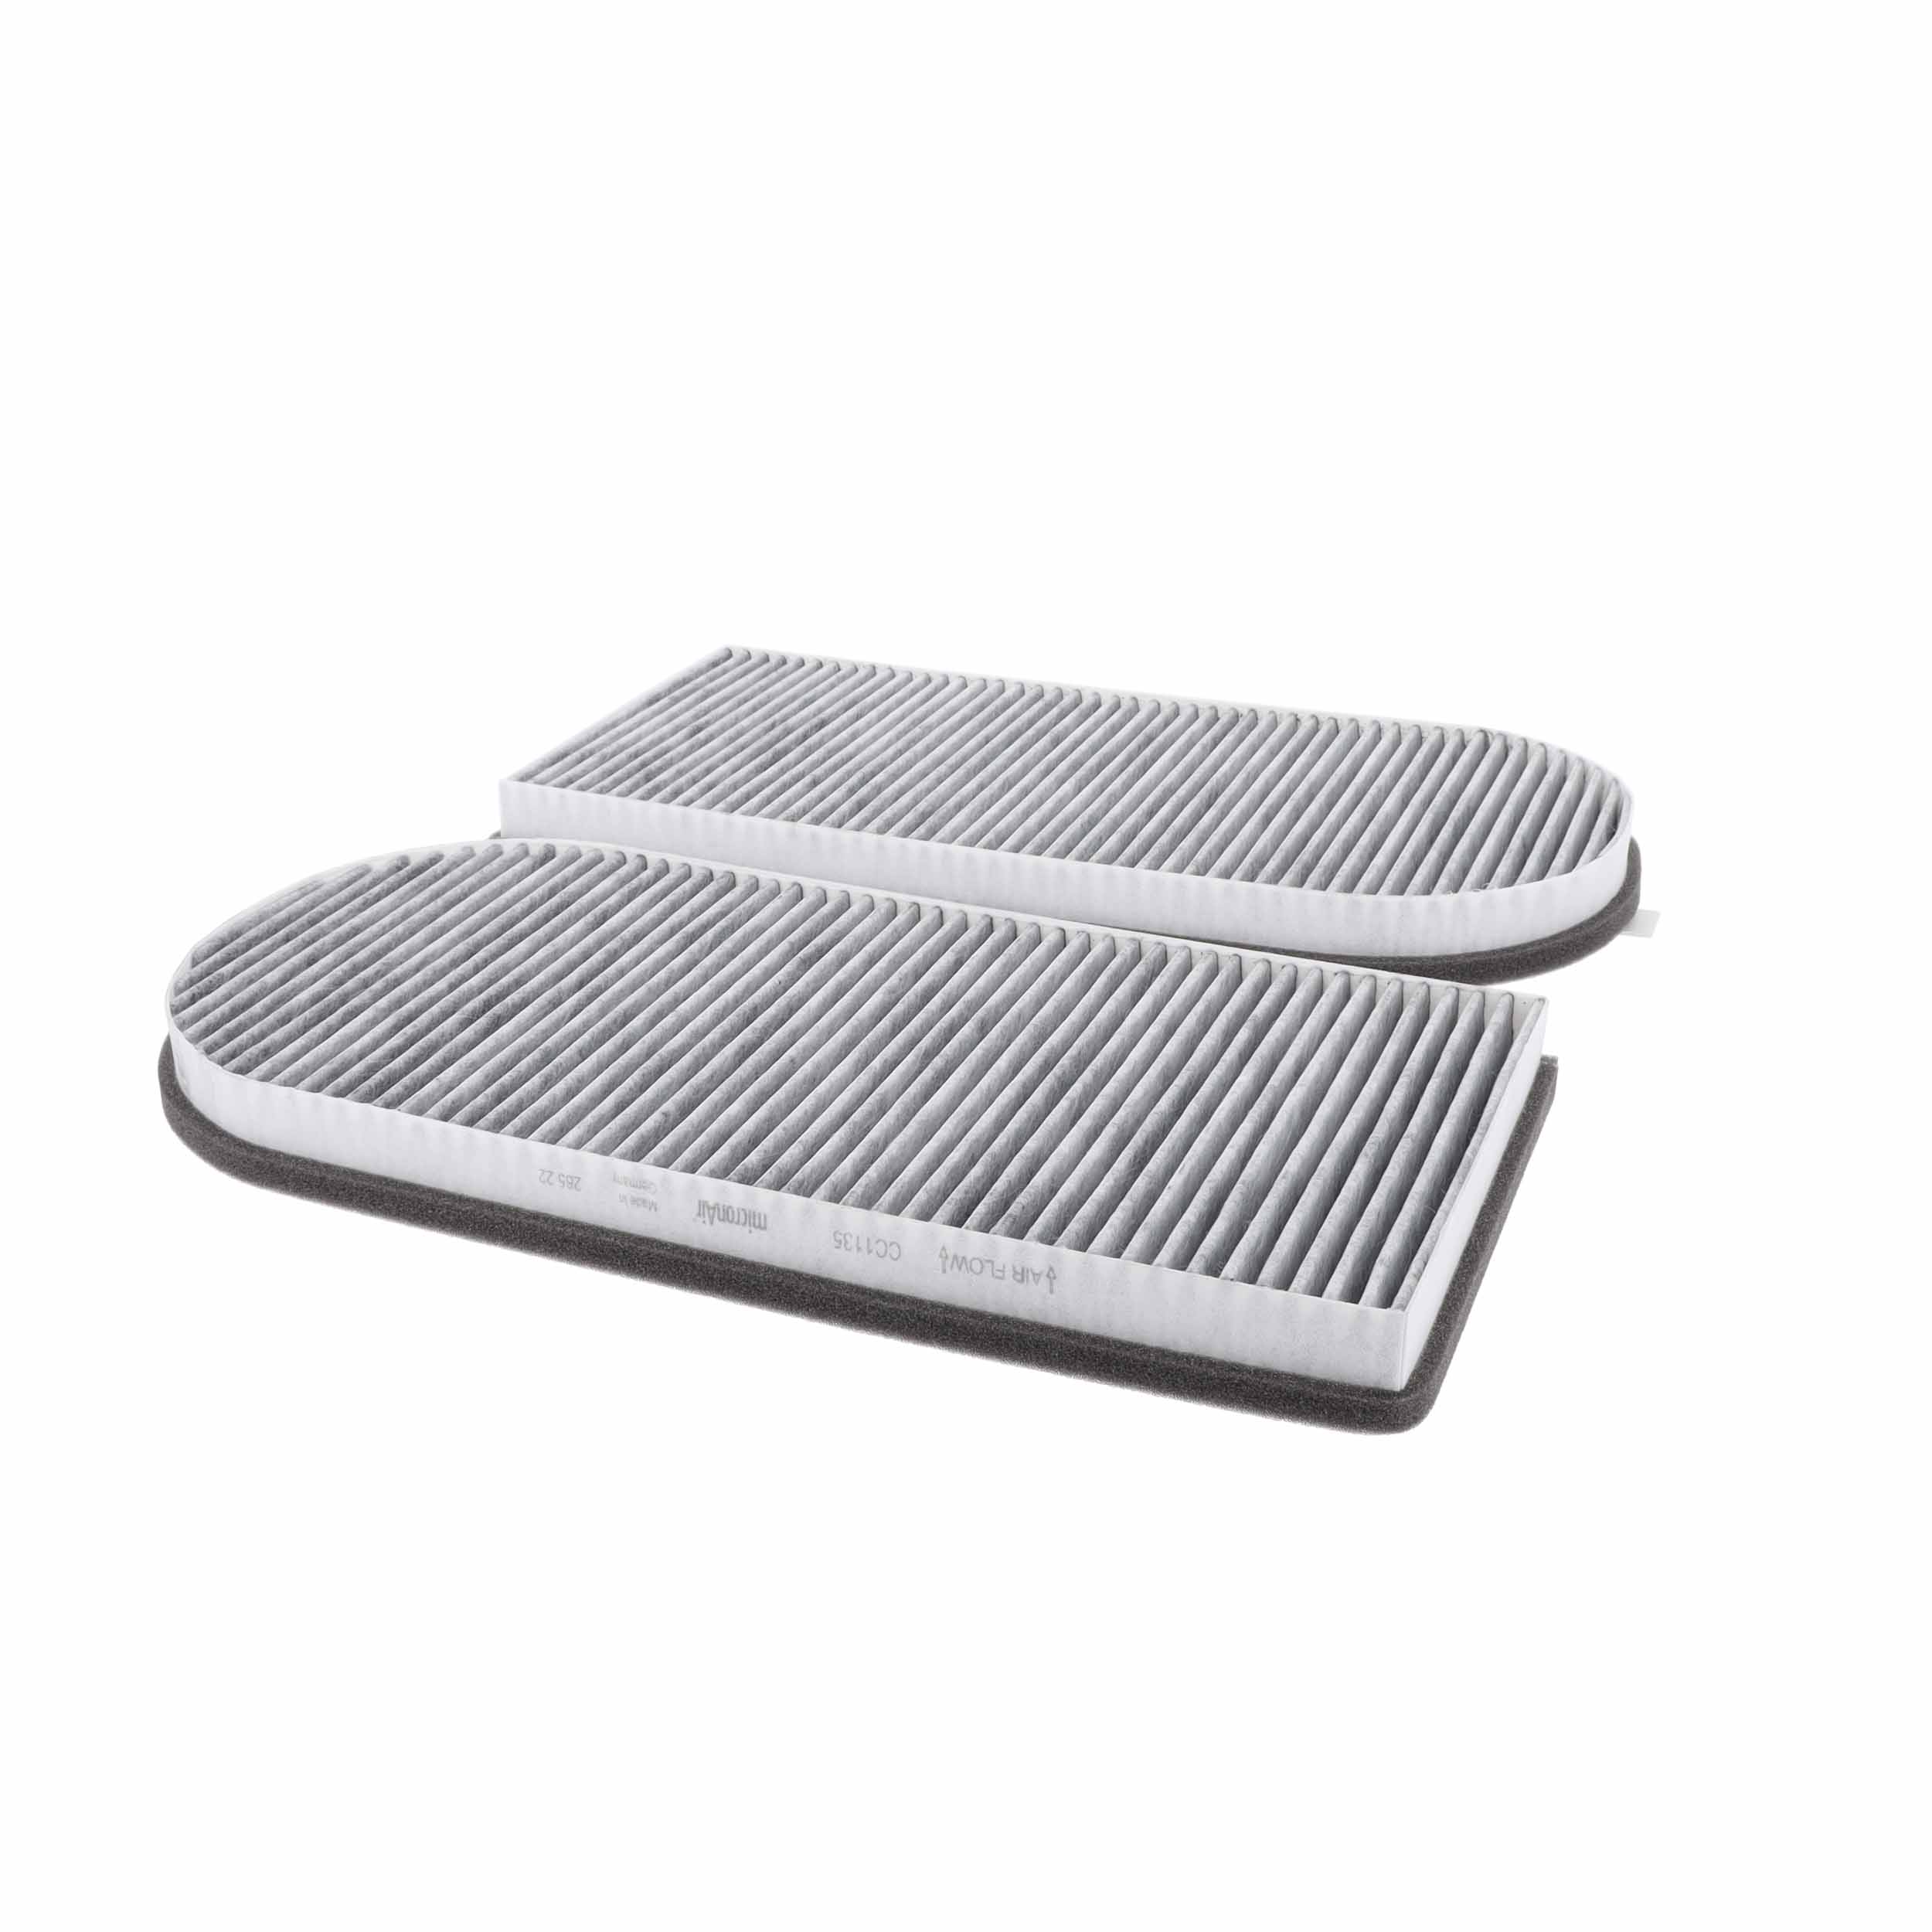 CORTECO Activated Carbon Filter, 356 mm x 169 mm x 30 mm Width: 169mm, Height: 30mm, Length: 356mm Cabin filter 21651881 buy